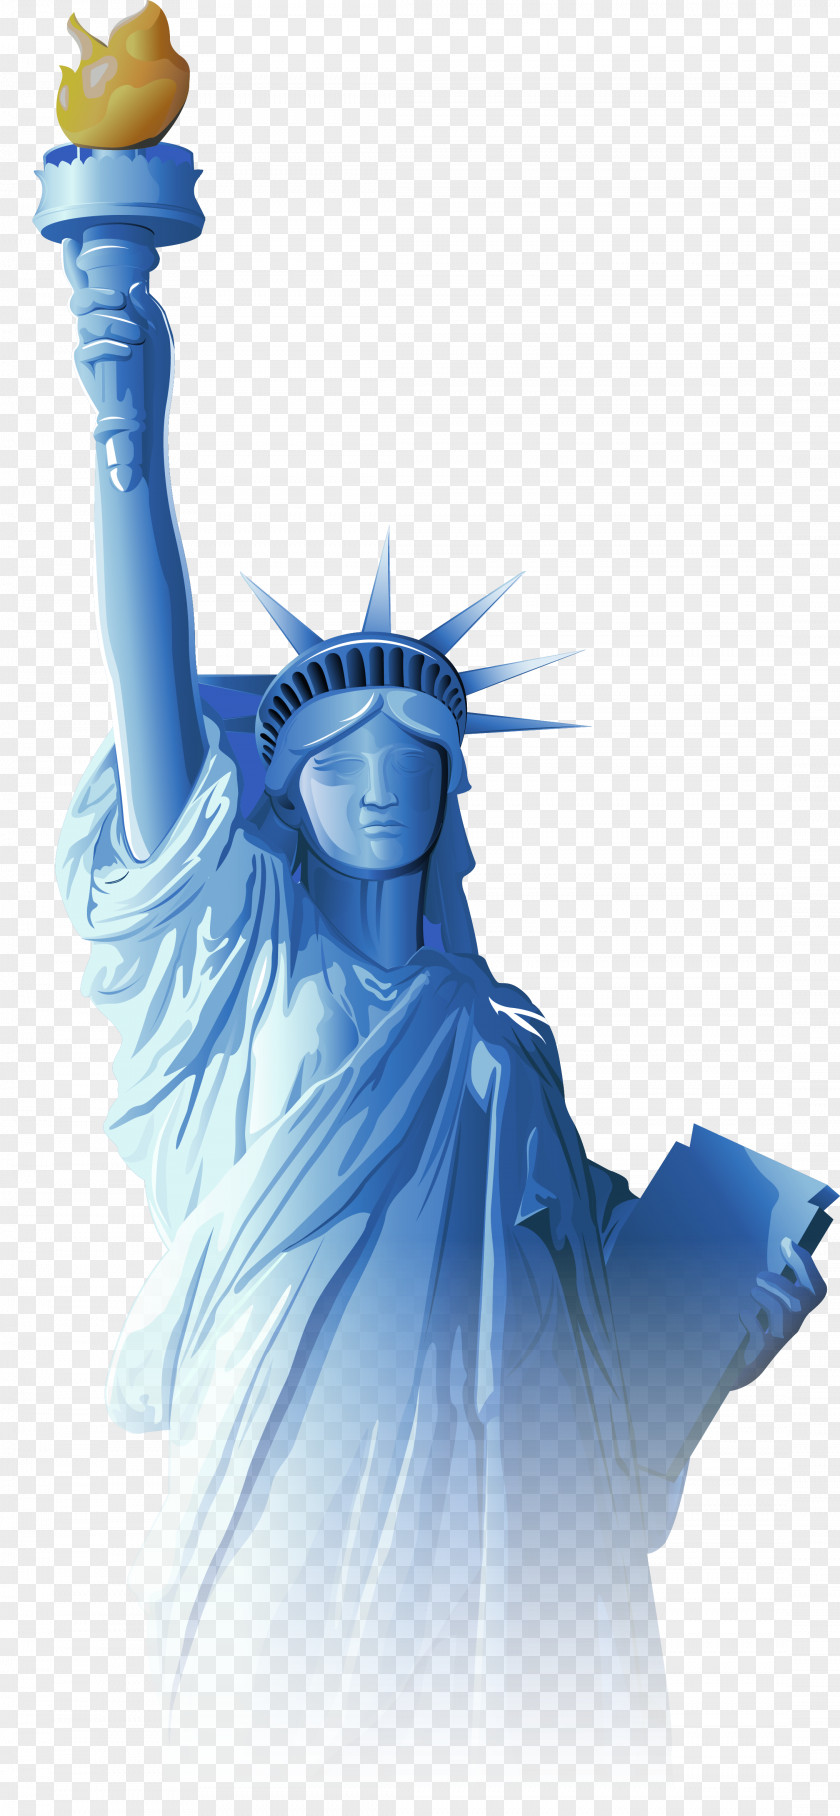 Statue Of Liberty Infographic PNG